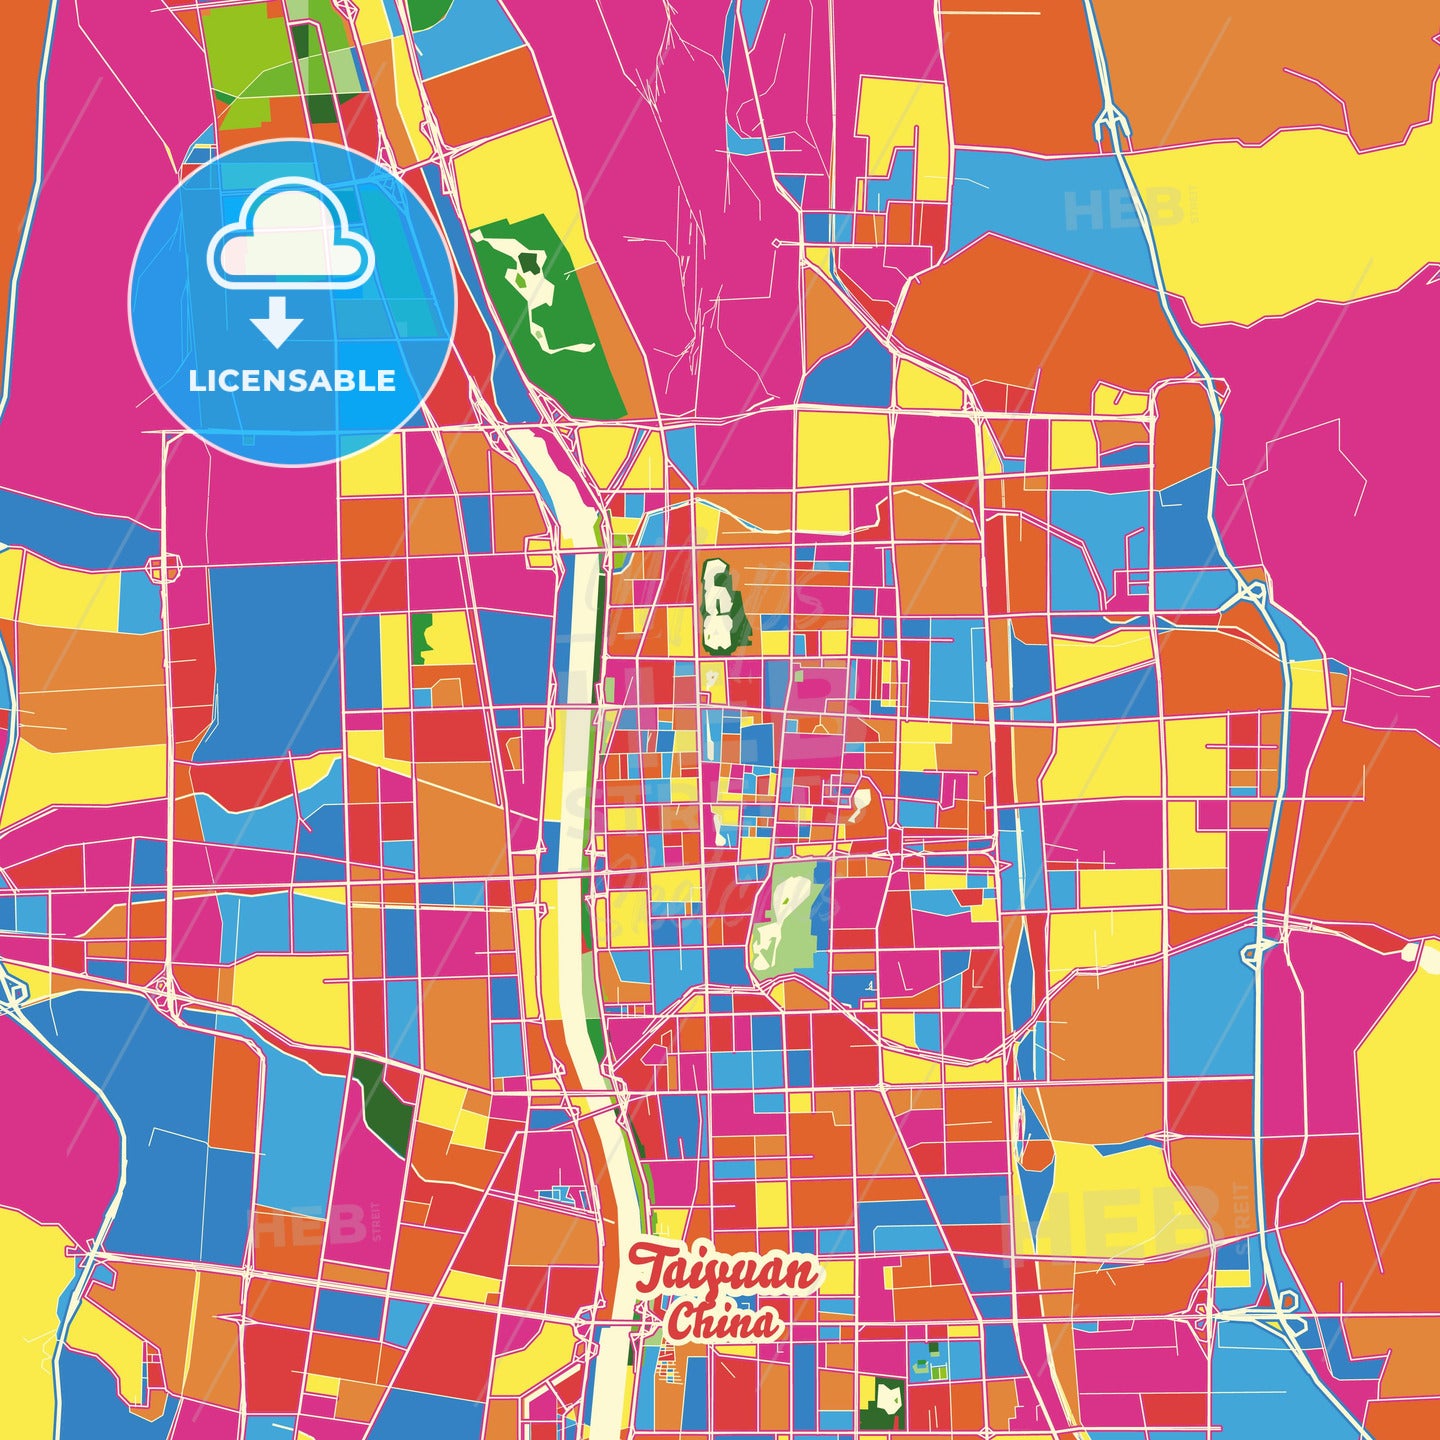 Taiyuan, China Crazy Colorful Street Map Poster Template - HEBSTREITS Sketches